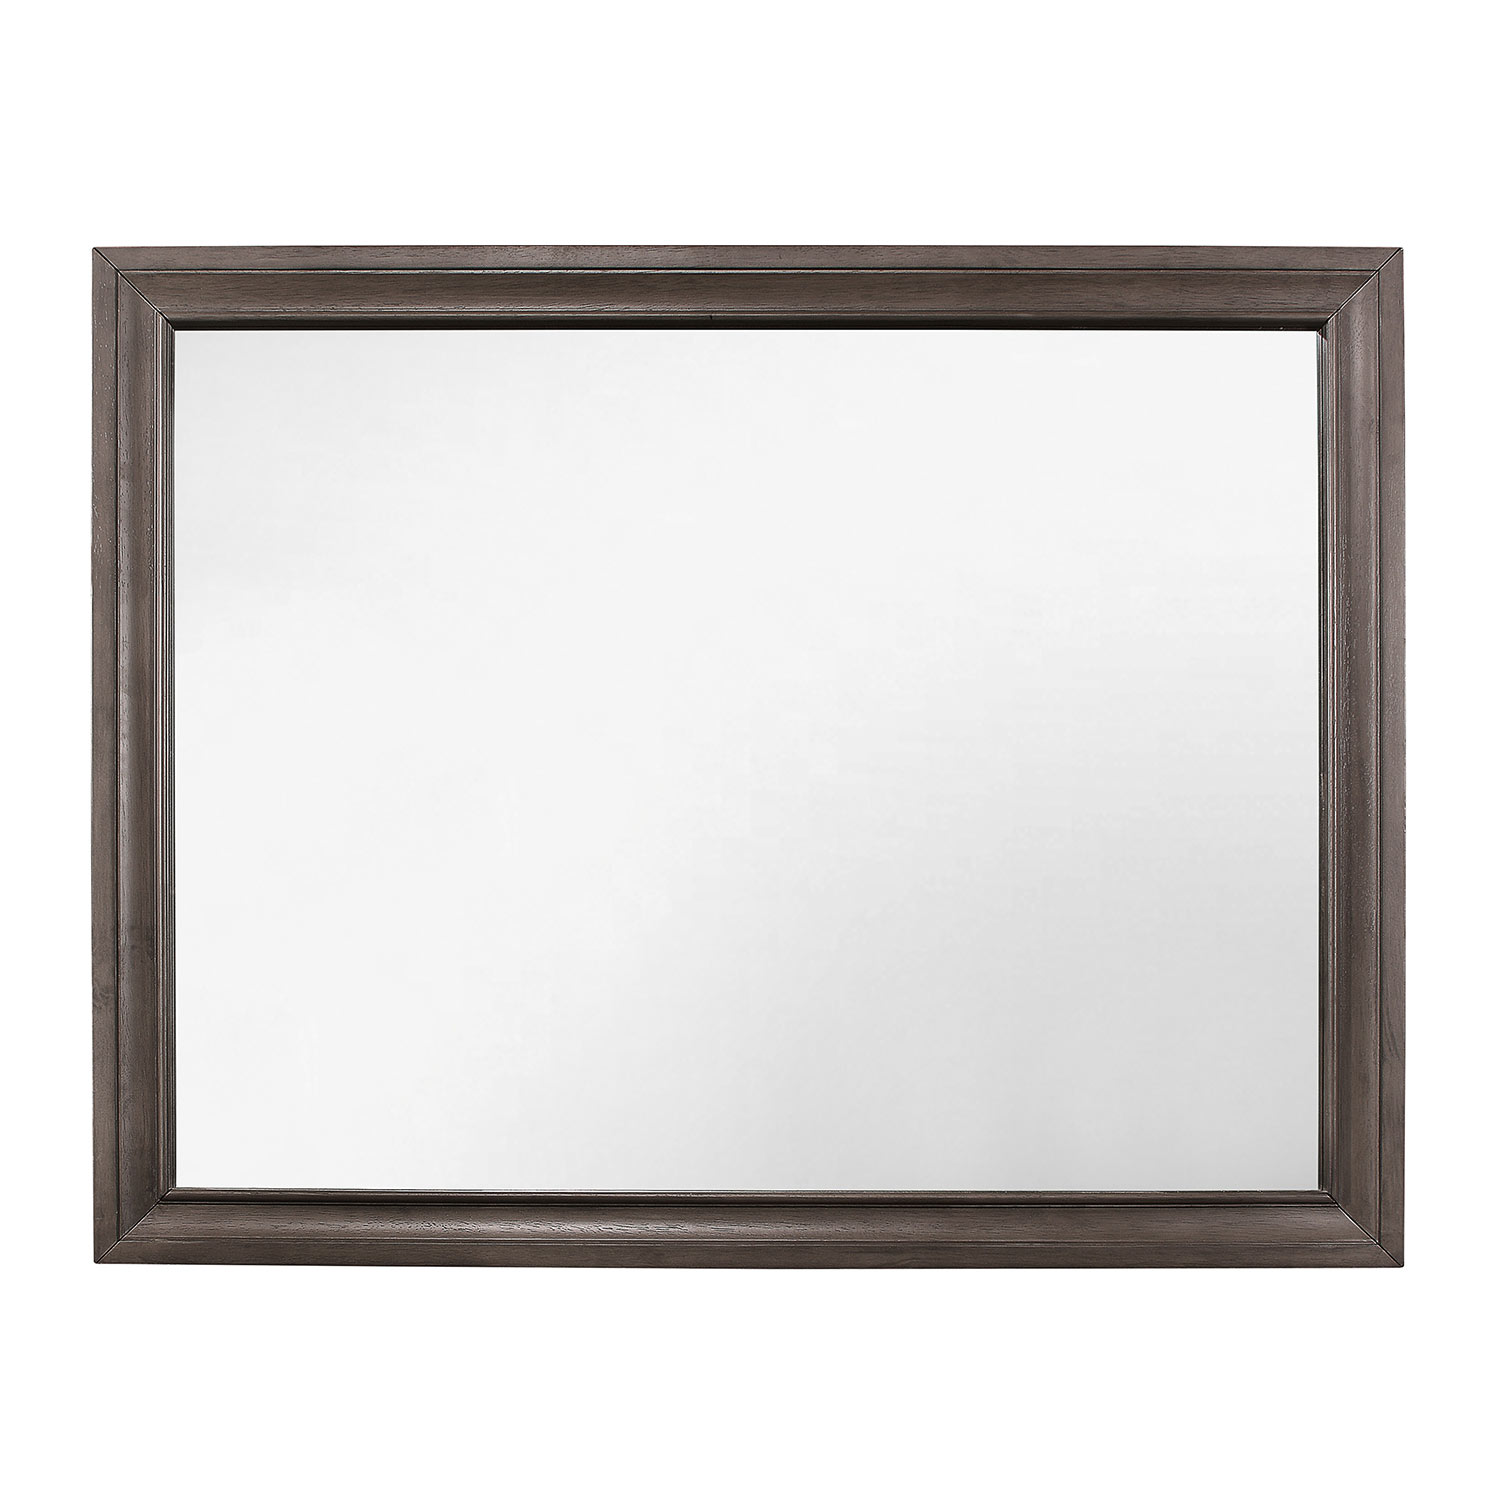 Homelegance Luster Mirror - Gray and Silver Glitter